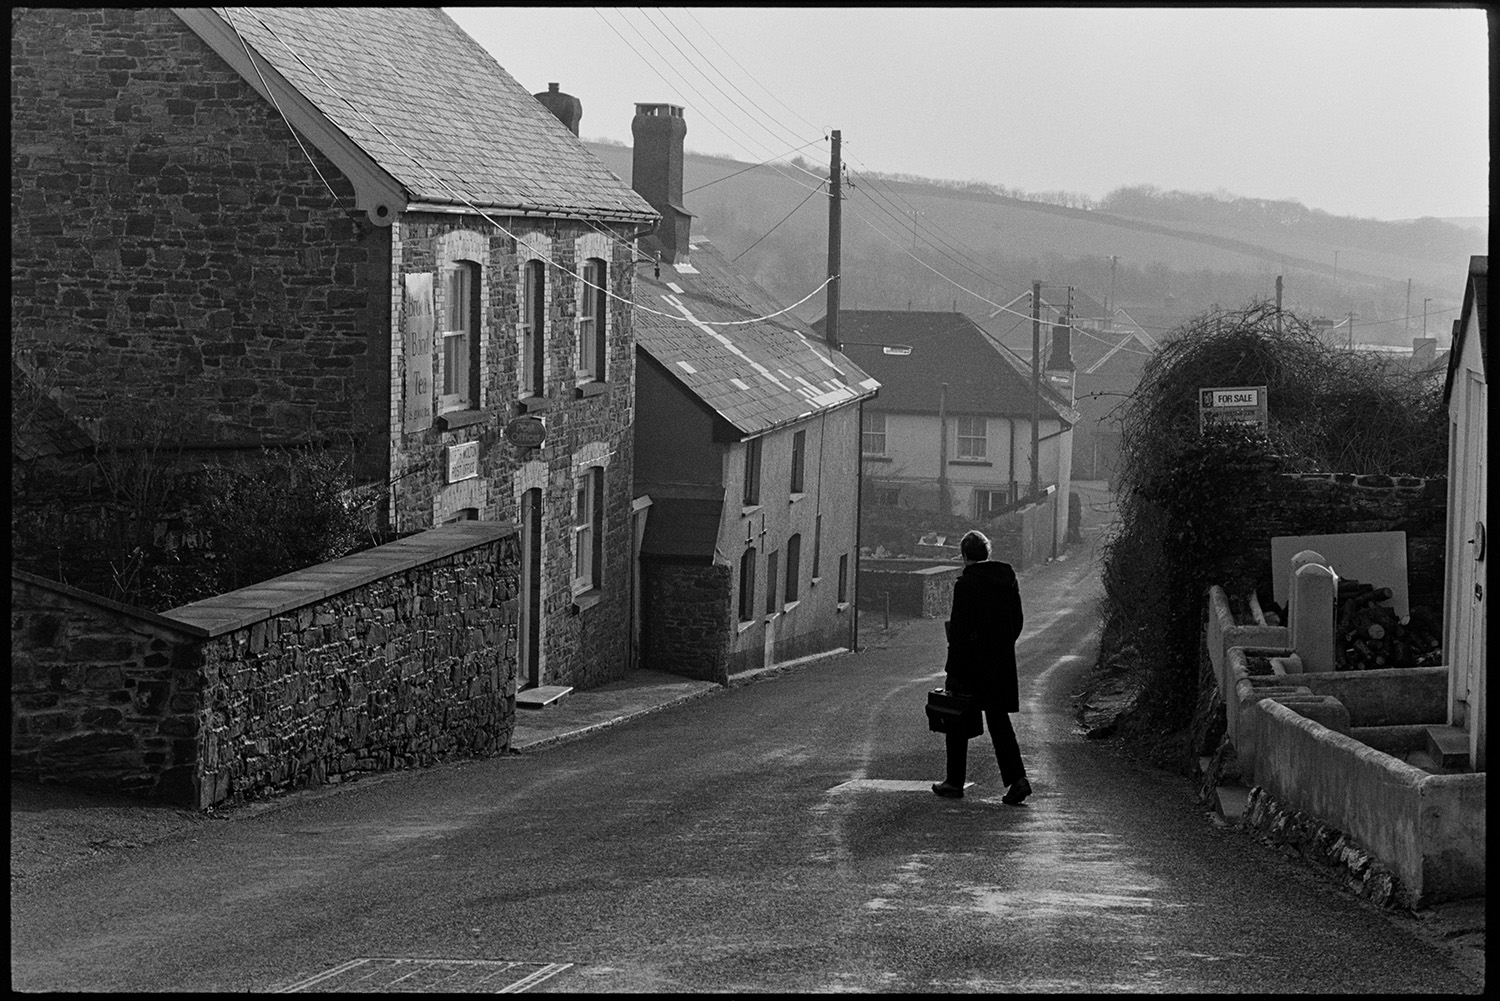 Doctor on his rounds with medical bag. 
[Doctor Richard Westcott walking along a road past houses in North Molton on his rounds to see patients. He is carrying a medical bag.]